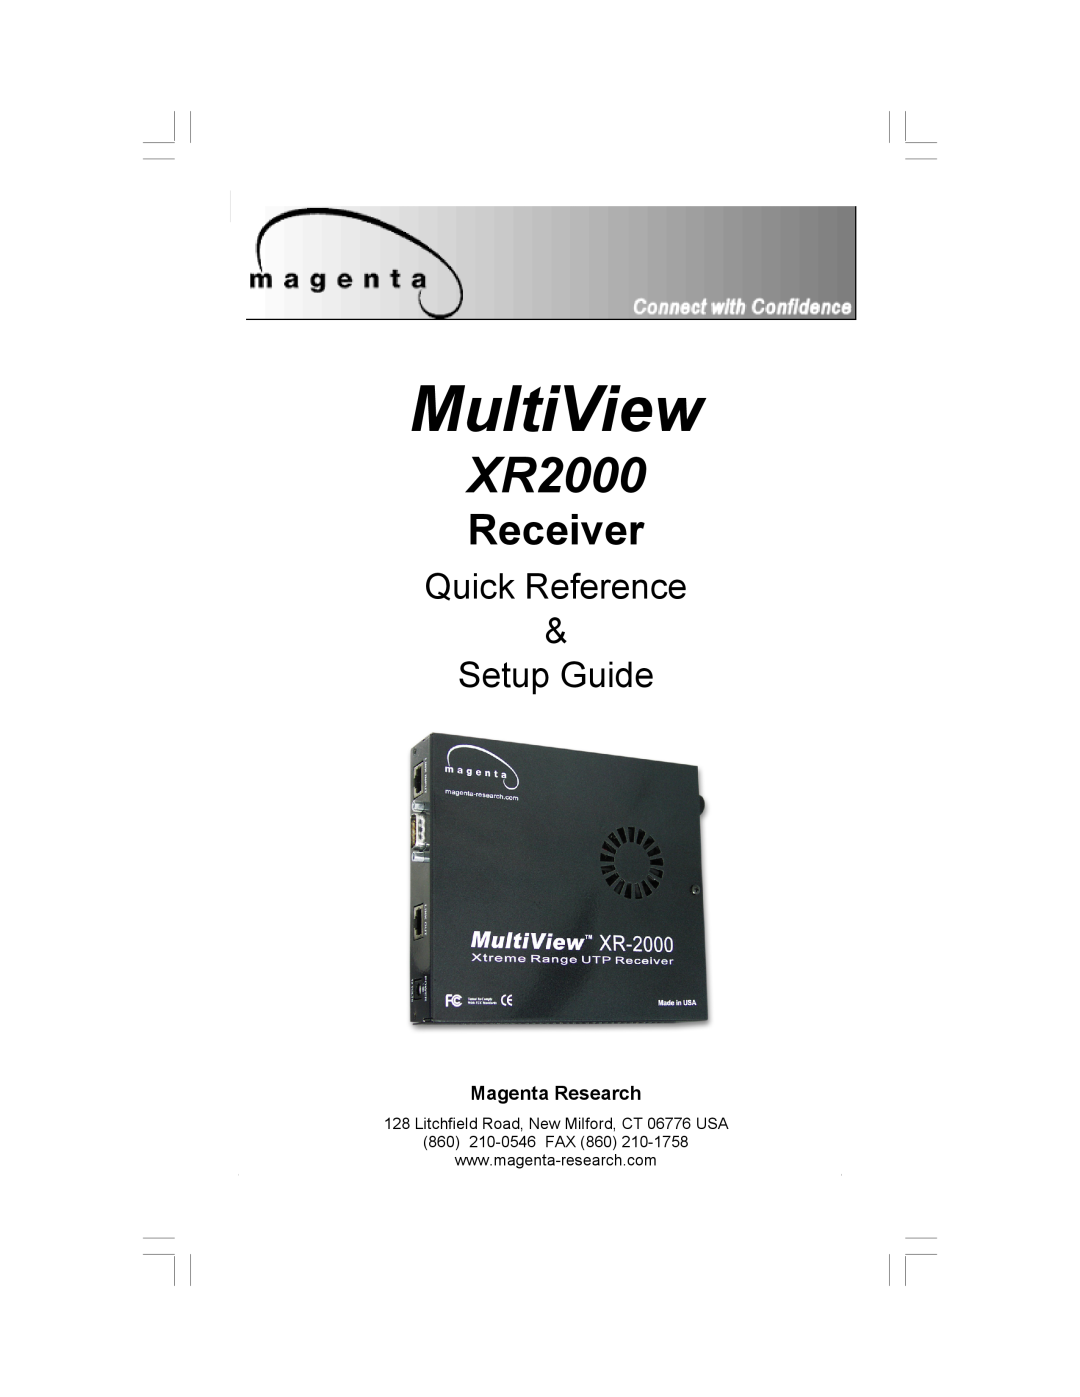 Magenta XR2000 setup guide Quick Reference & Setup Guide, Magenta Research, MultiView, Receiver 